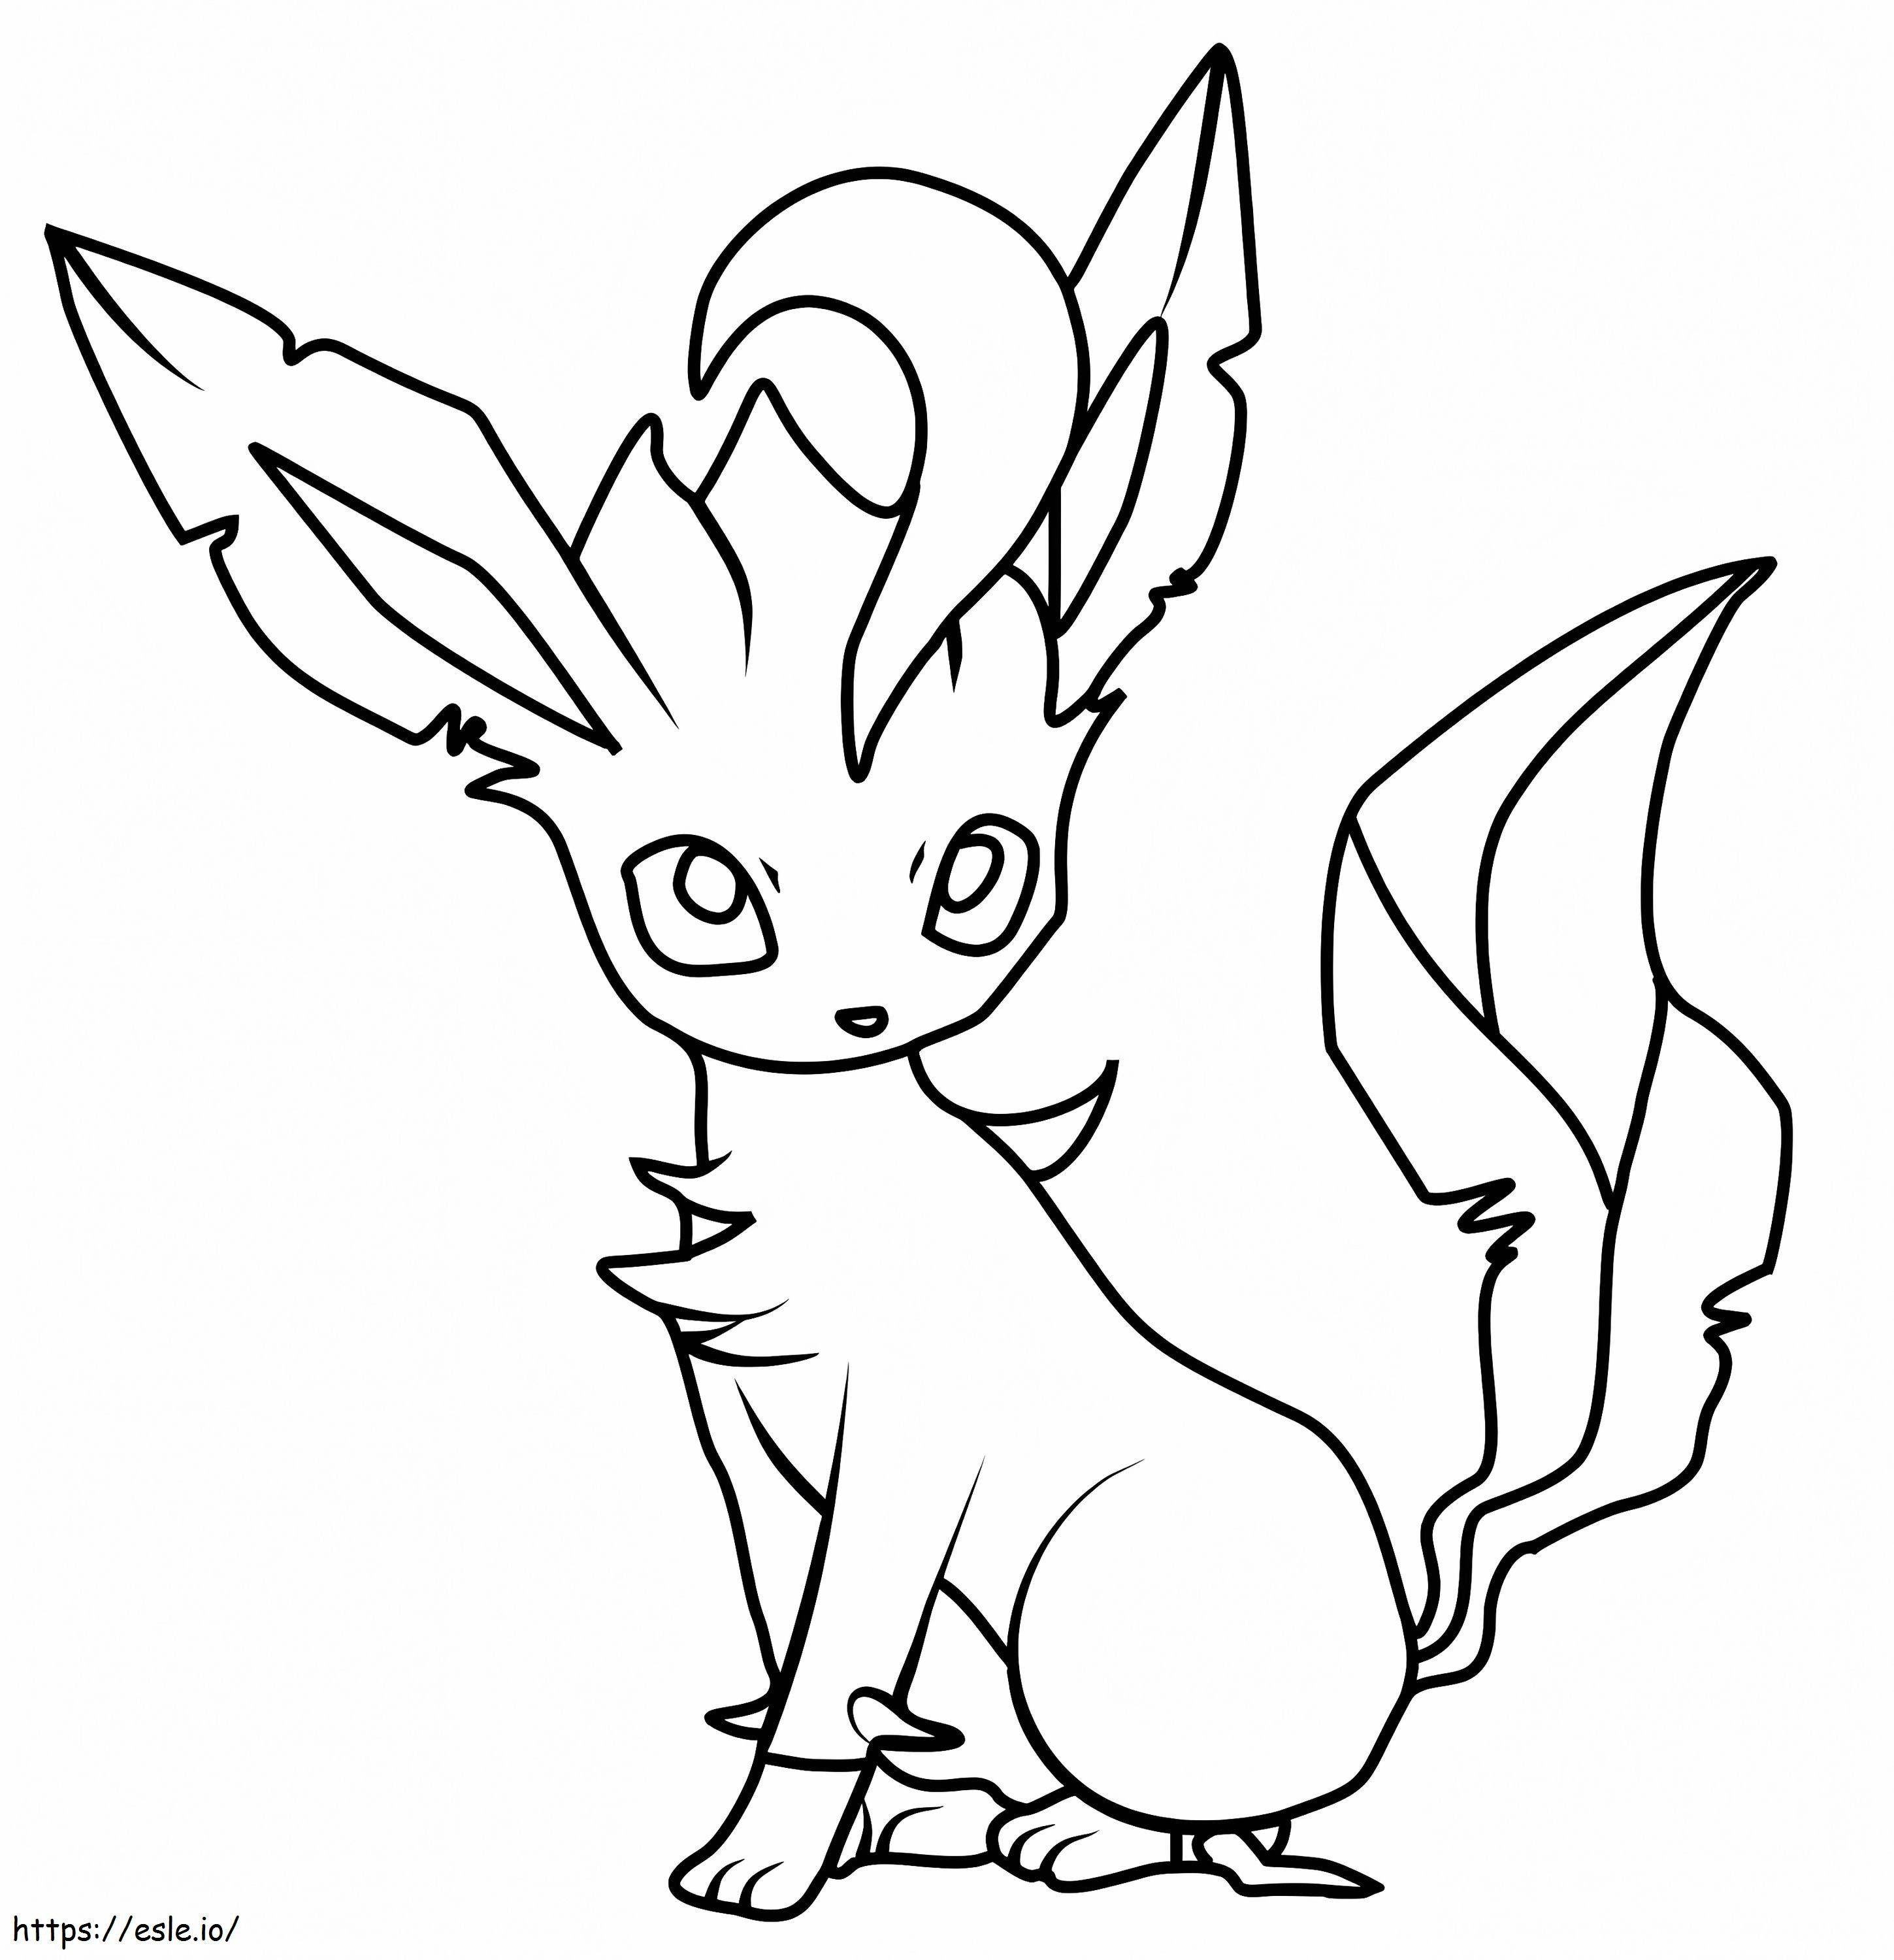 Lovely Leafeon Pokemon coloring page